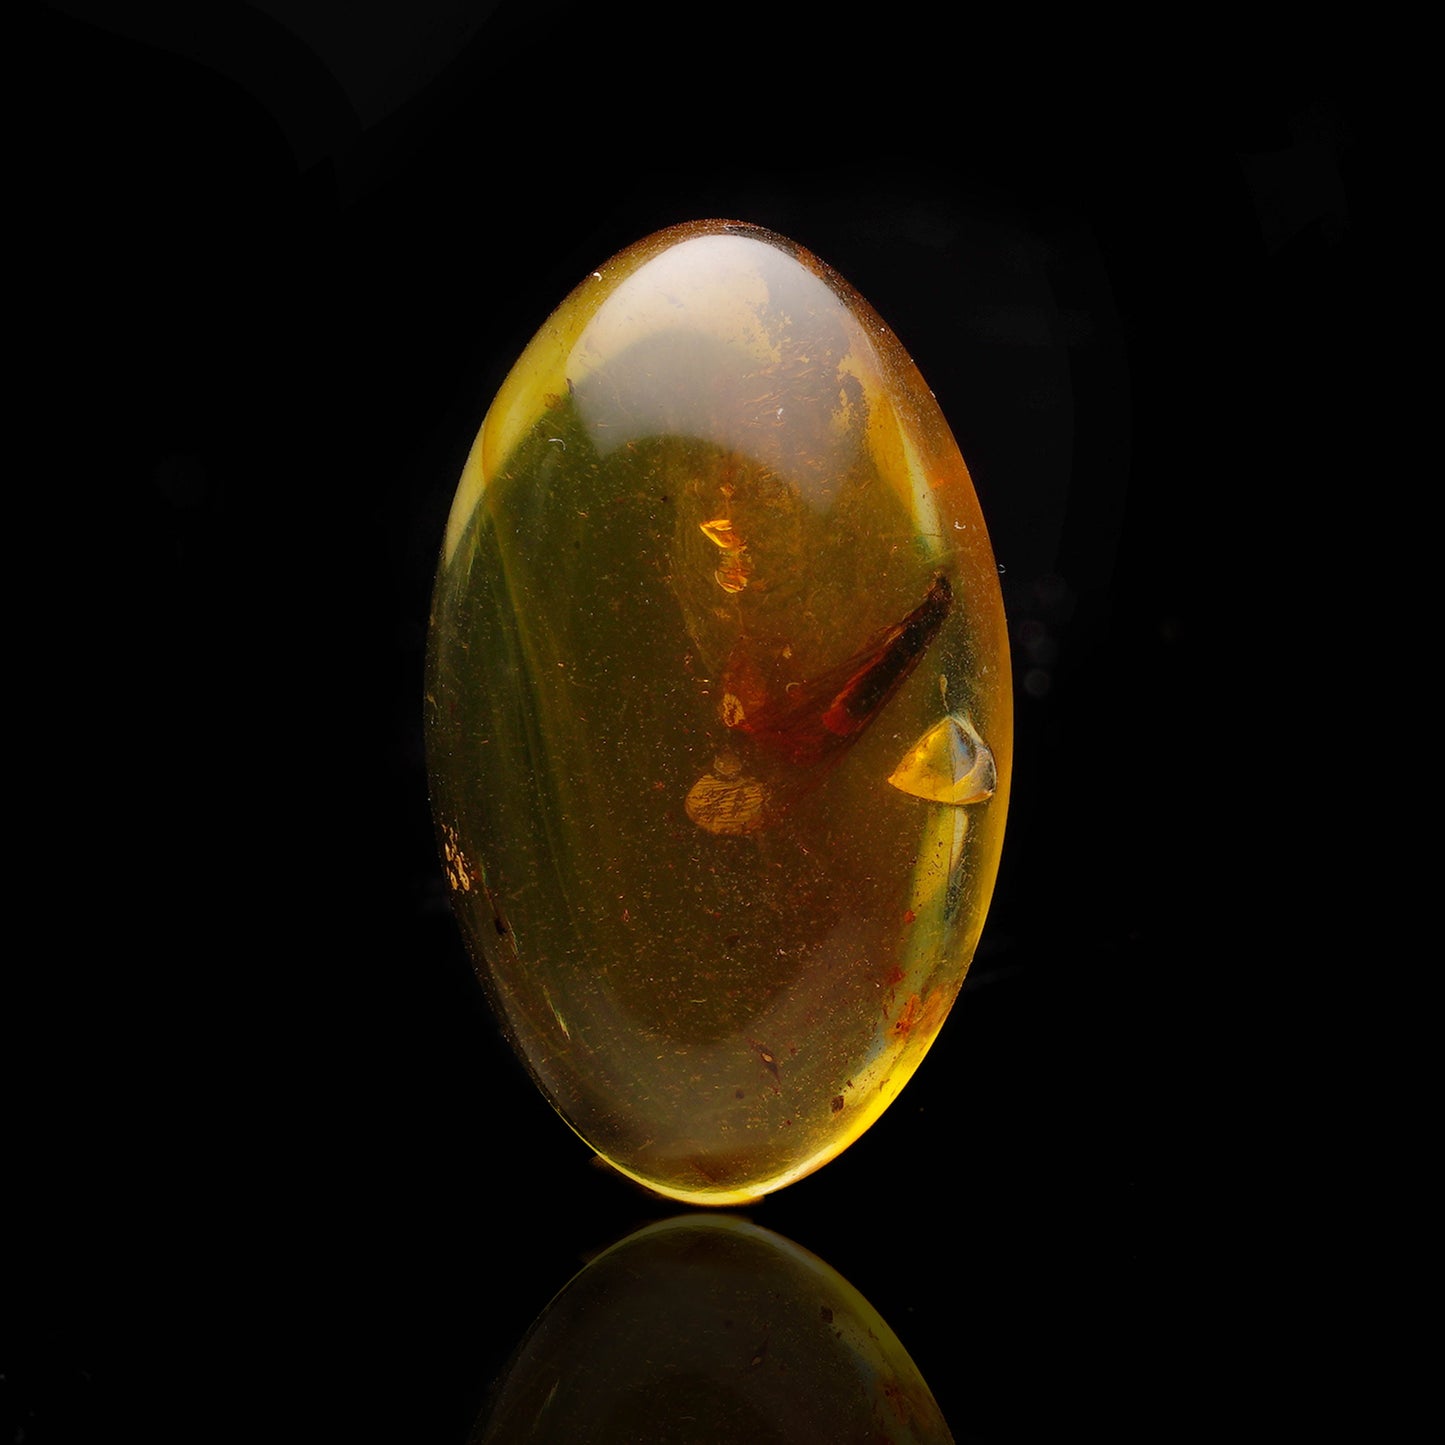 Baltic Amber With Caddisfly // 1.75 Grams